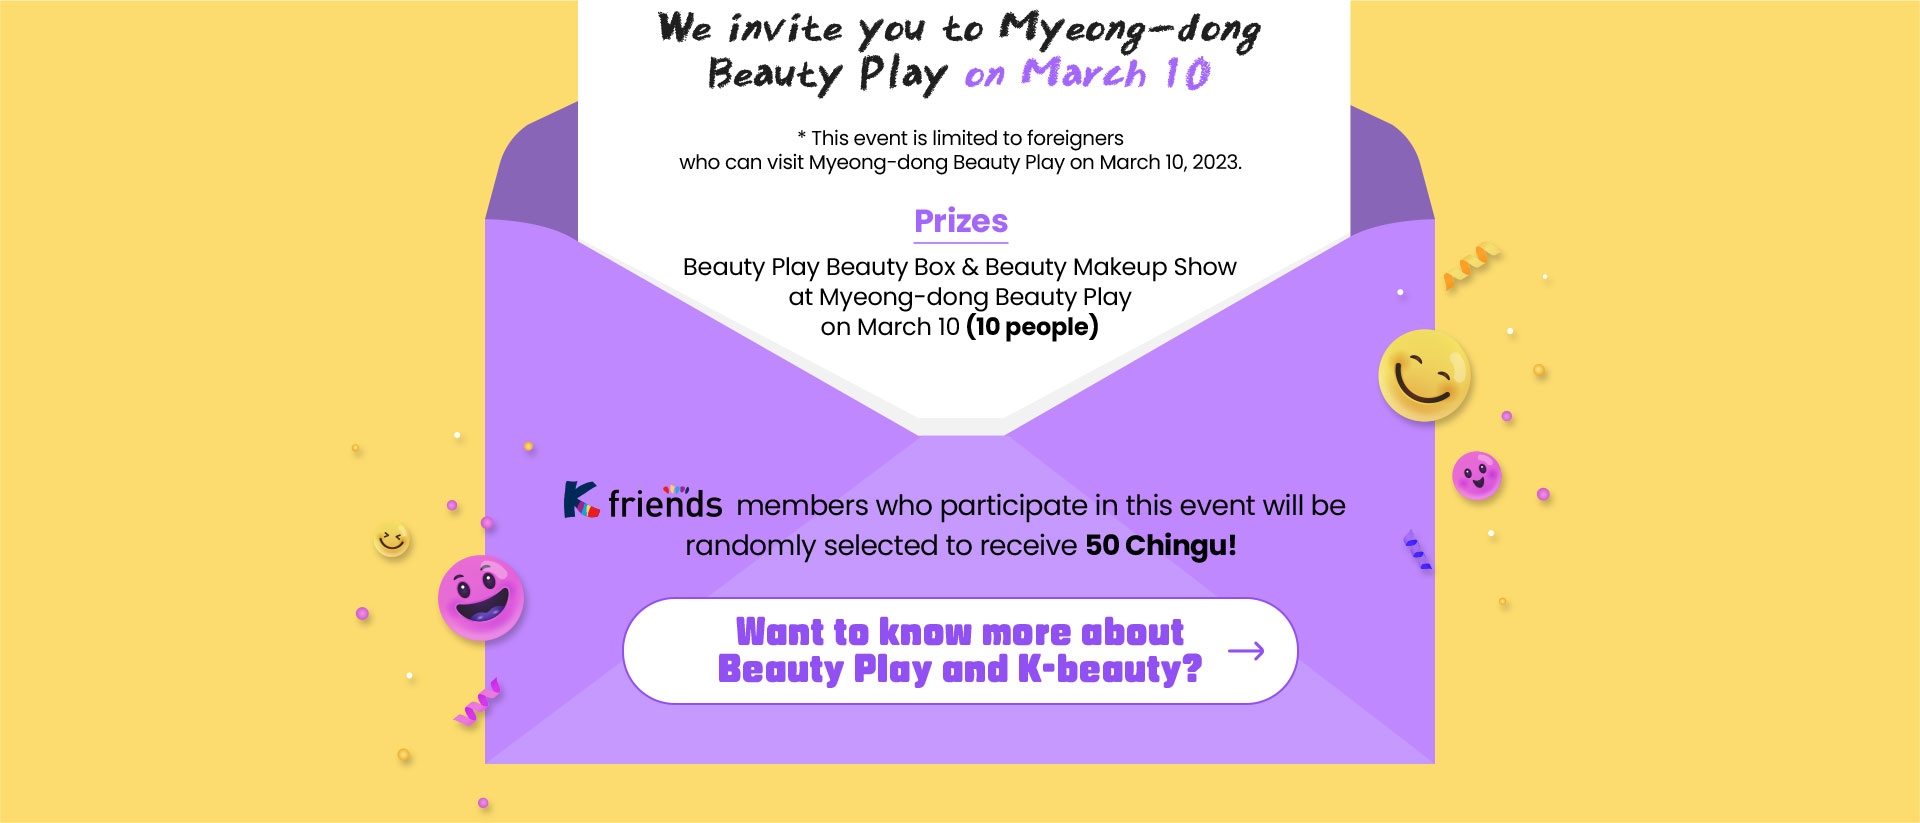 We invite you to Myeong-dong Beauty Play on March 10​ * This event is limited to foreigners who can visit Myeong-dong Beauty Play on March 10, 2023.​ Prize: Beauty Play Beauty Box & Beauty Makeup Show at Myeong-dong Beauty Play on March 10 (10 people)​ K-friends members who participate in this event will be randomly selected to receive 50 Chingu points!​